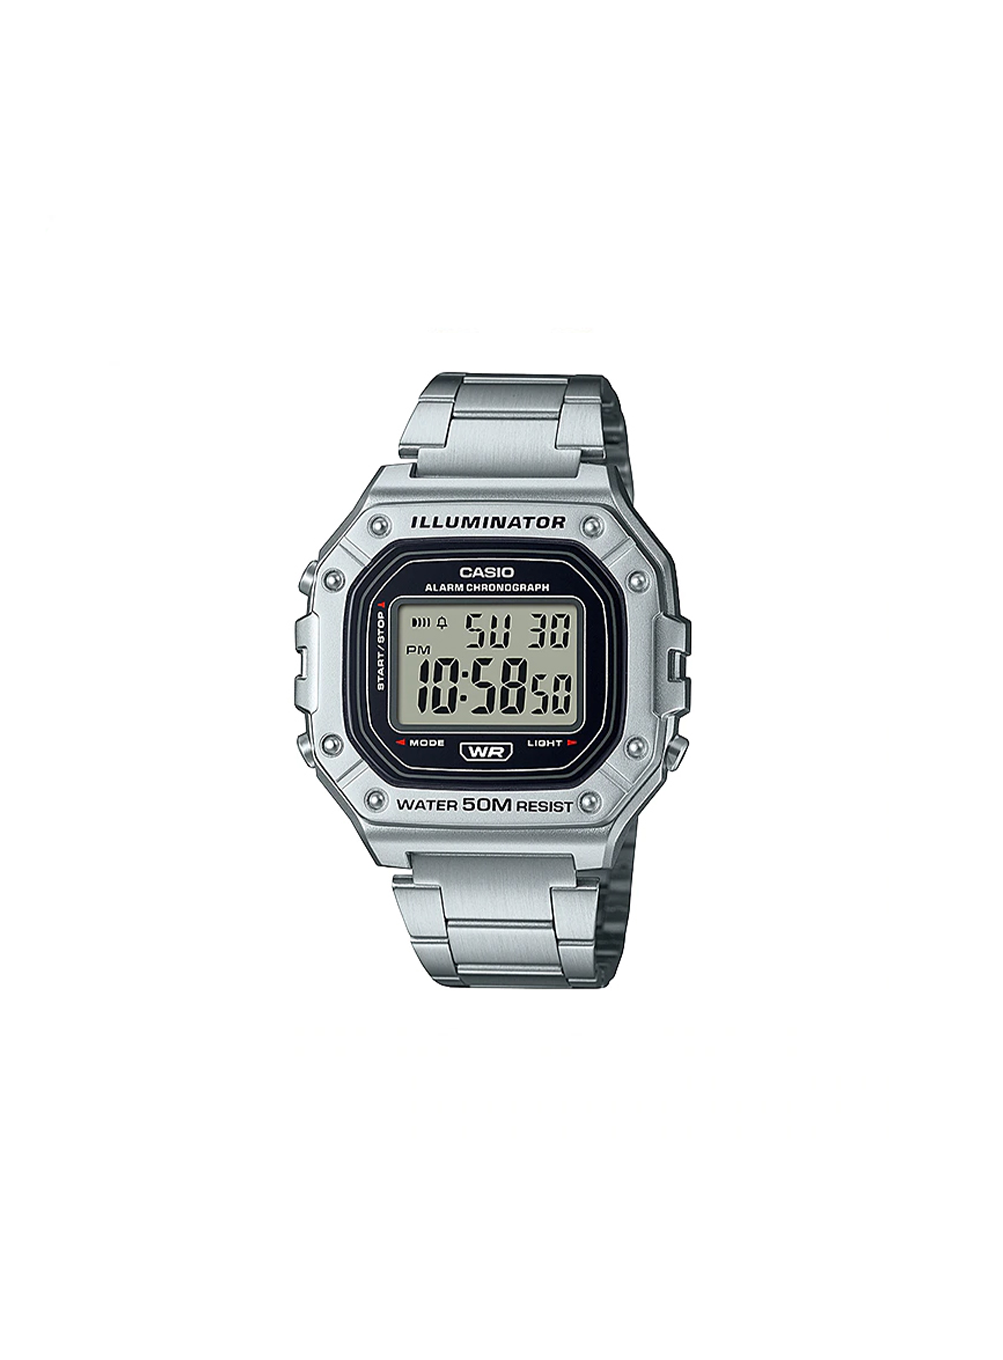 silver electronic watch